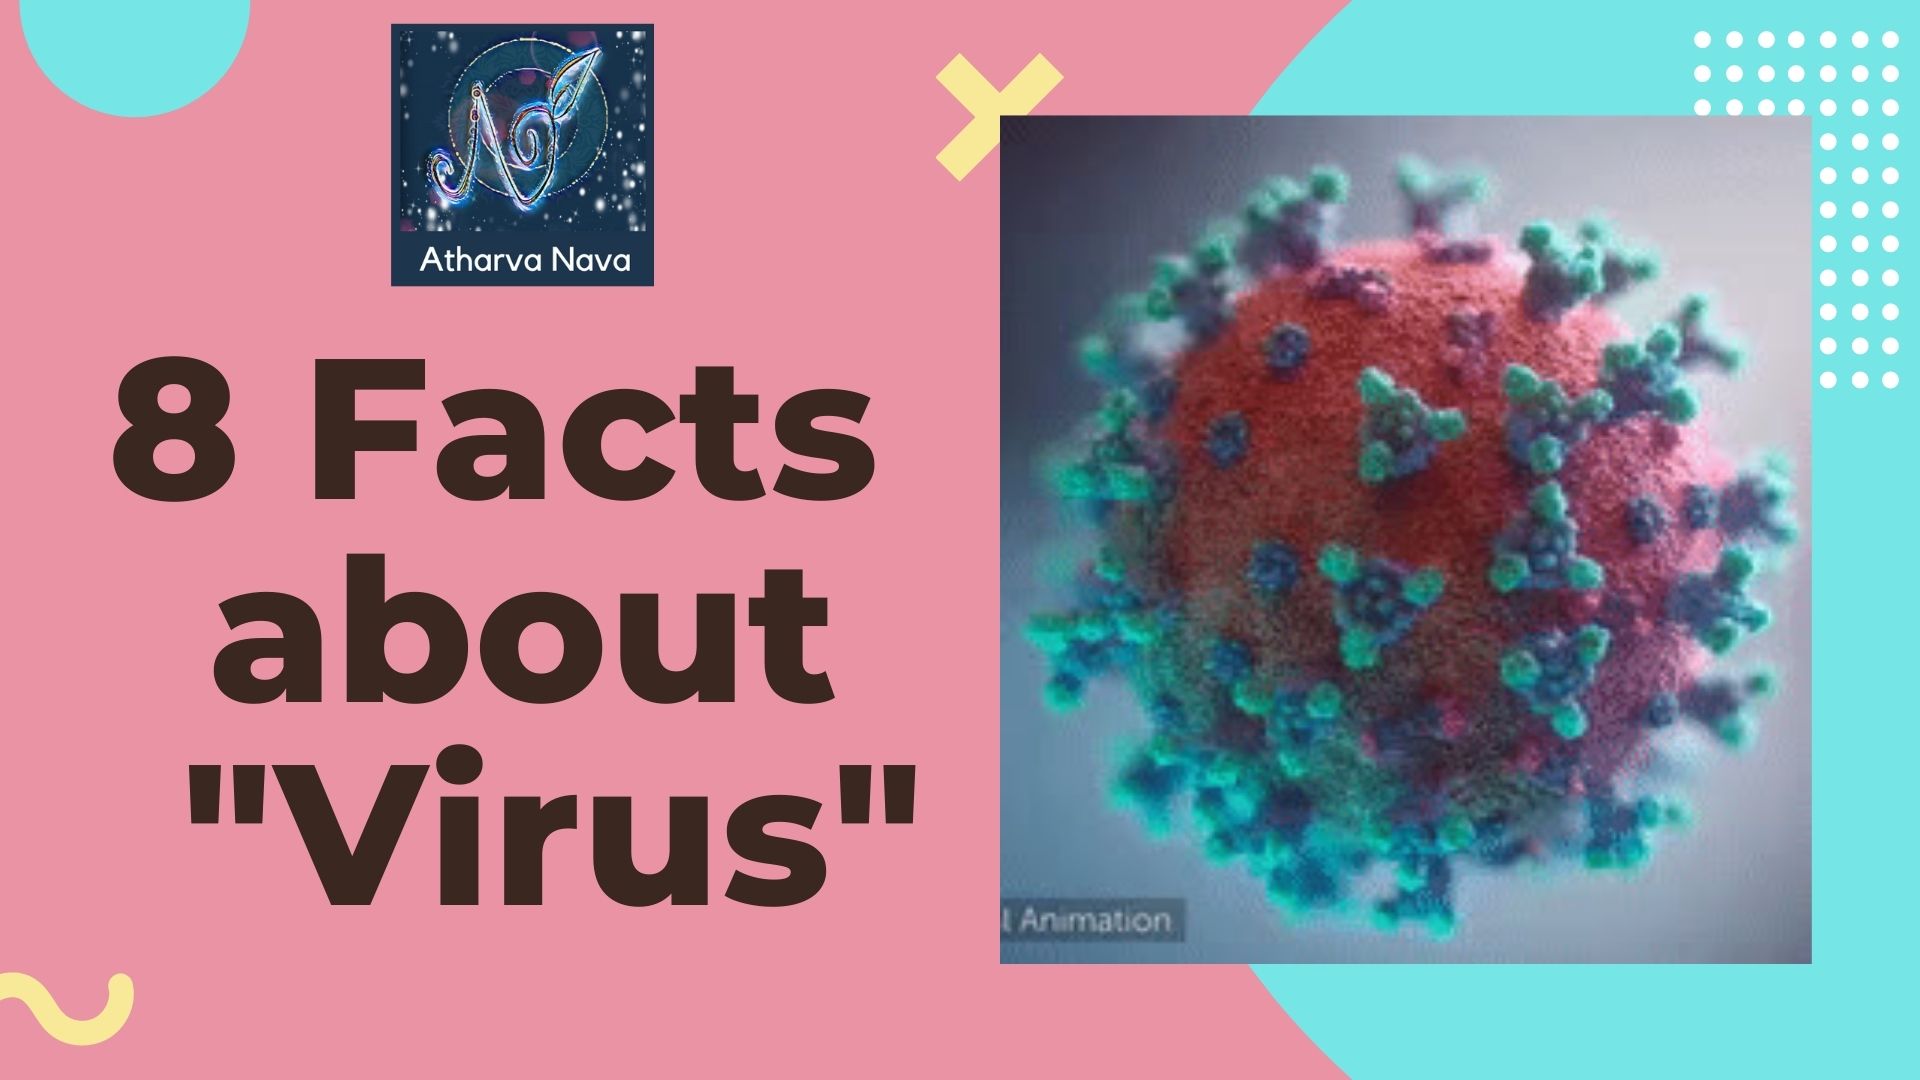 8 Facts about “Virus”